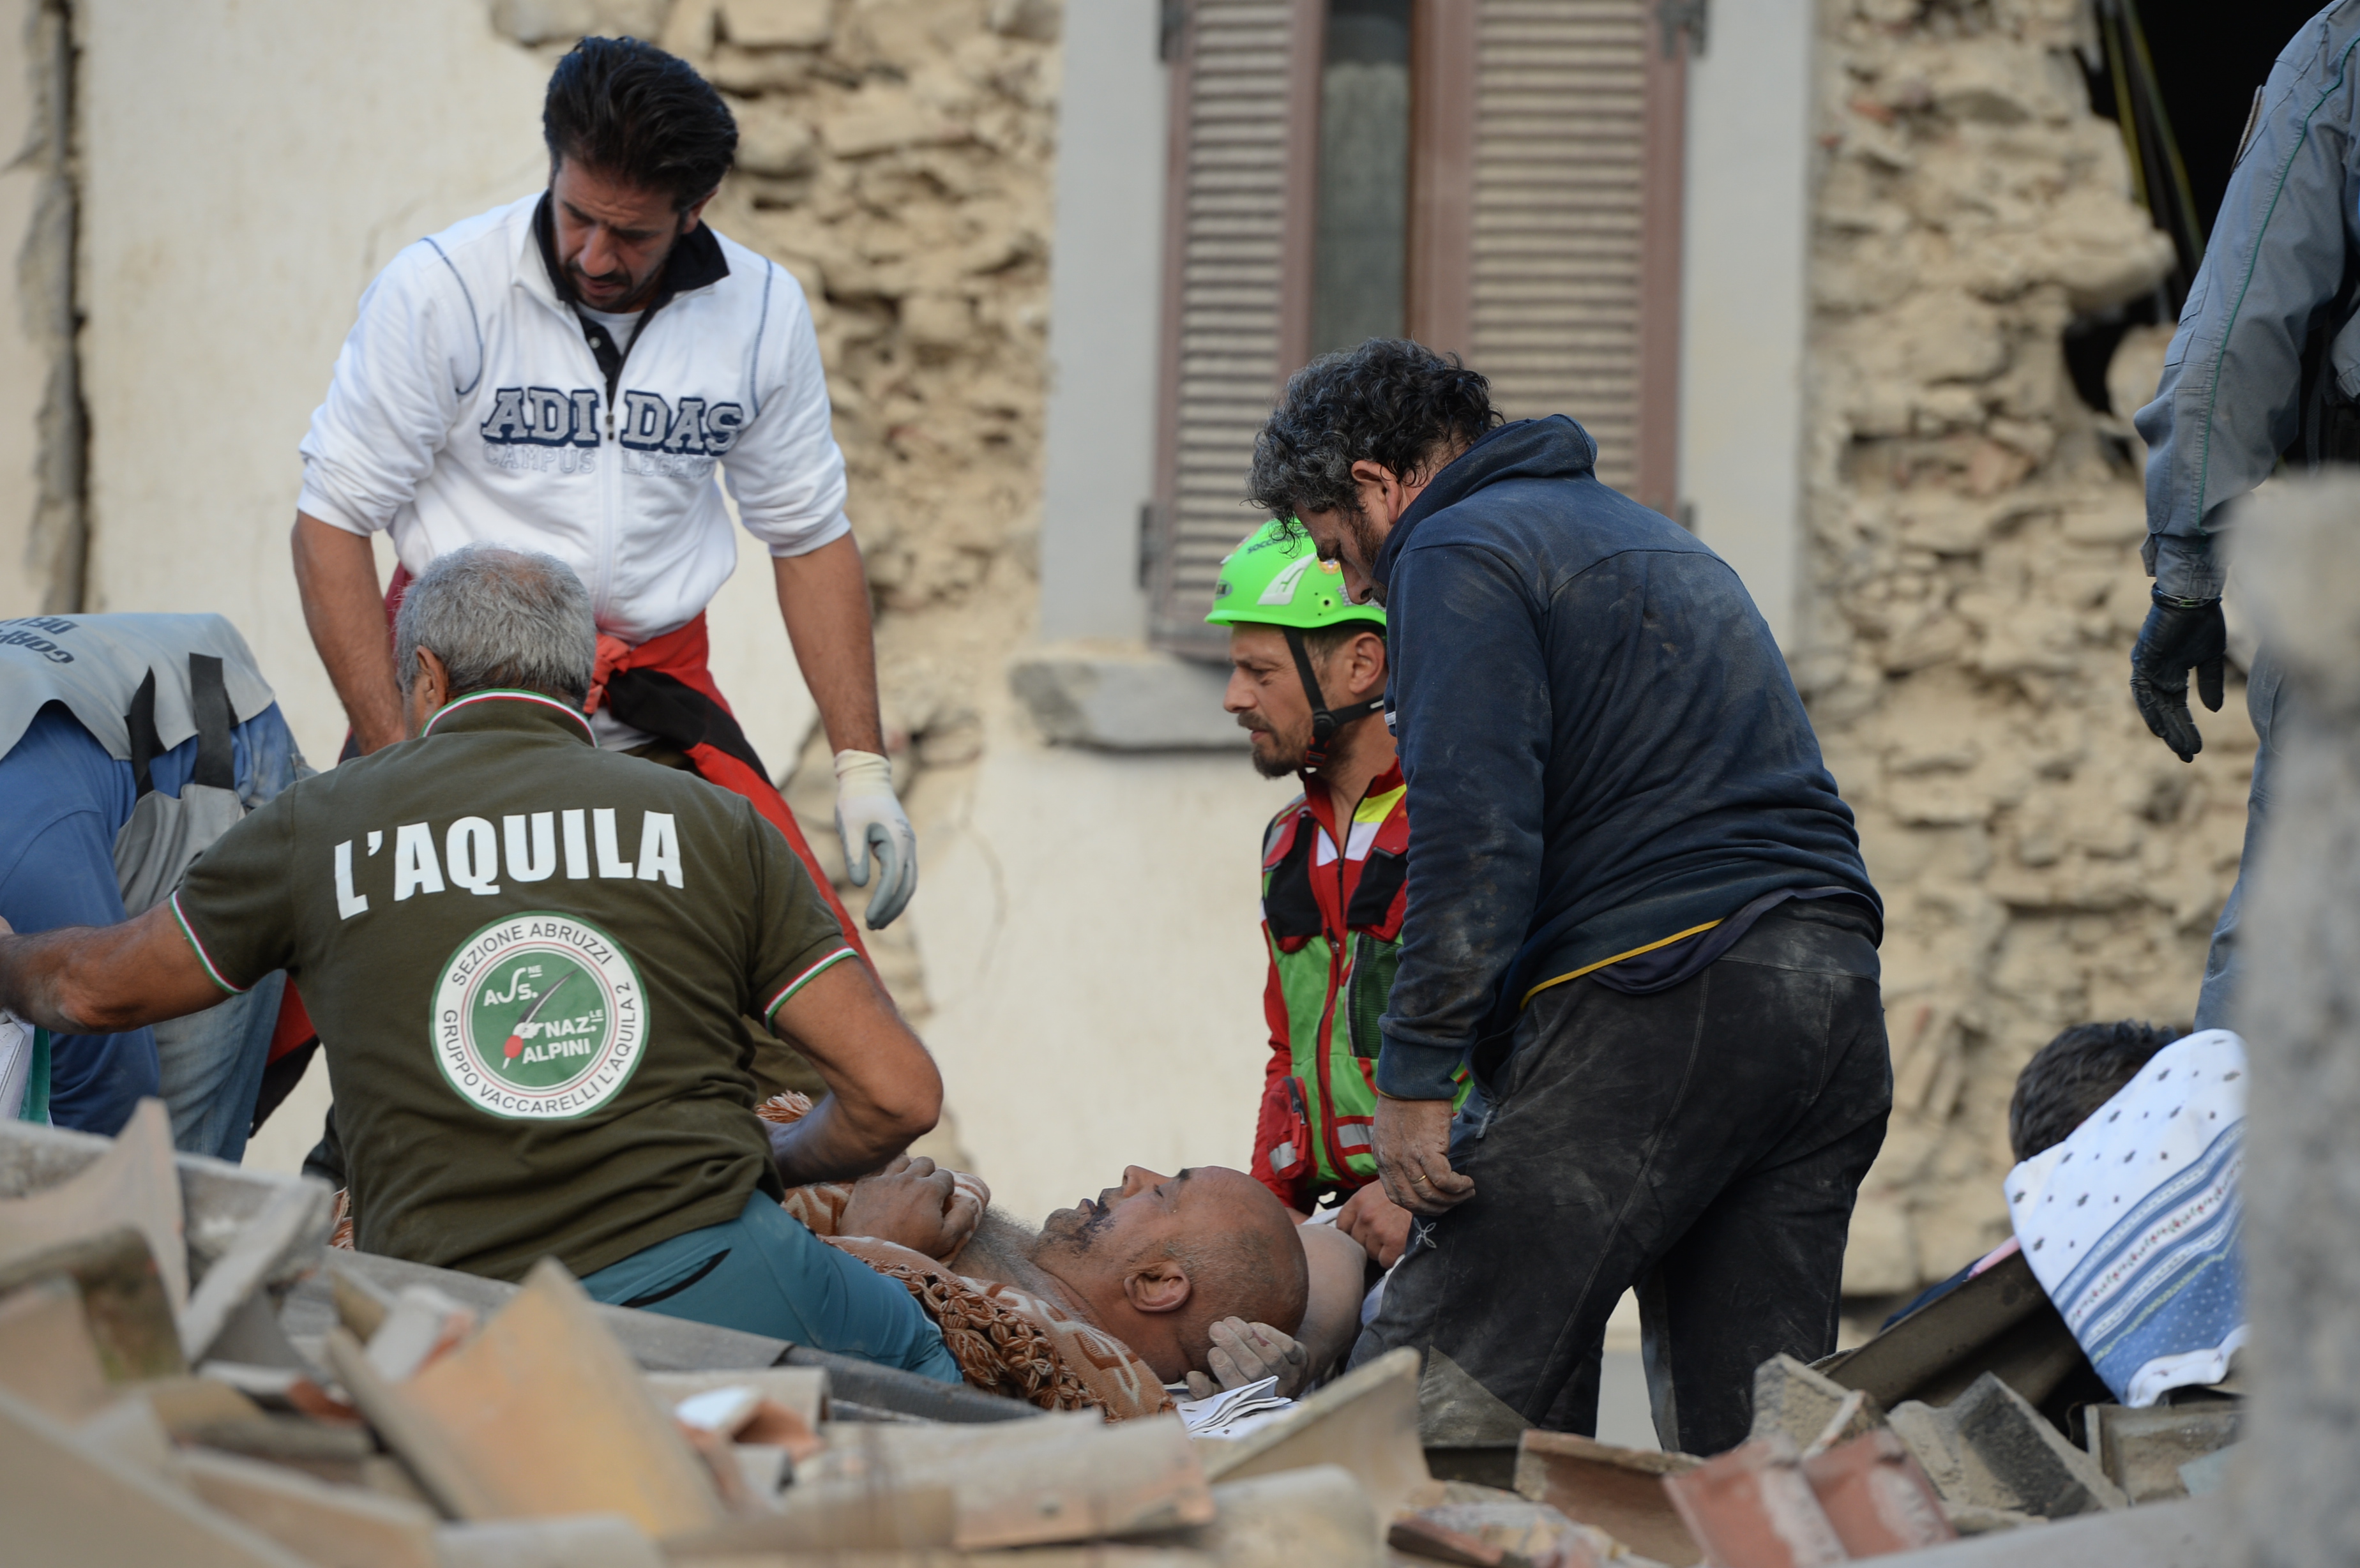 Rescuers help a victim in a damaged building after a strong heartquake hit Amatrice on August 24, 2016. Central Italy was struck by a powerful, 6.2-magnitude earthquake in the early hours, which has killed at least three people and devastated dozens of mountain villages. Numerous buildings had collapsed in communities close to the epicenter of the quake near the town of Norcia in the region of Umbria, witnesses told Italian media, with an increase in the death toll highly likely. / AFP PHOTO / FILIPPO MONTEFORTE